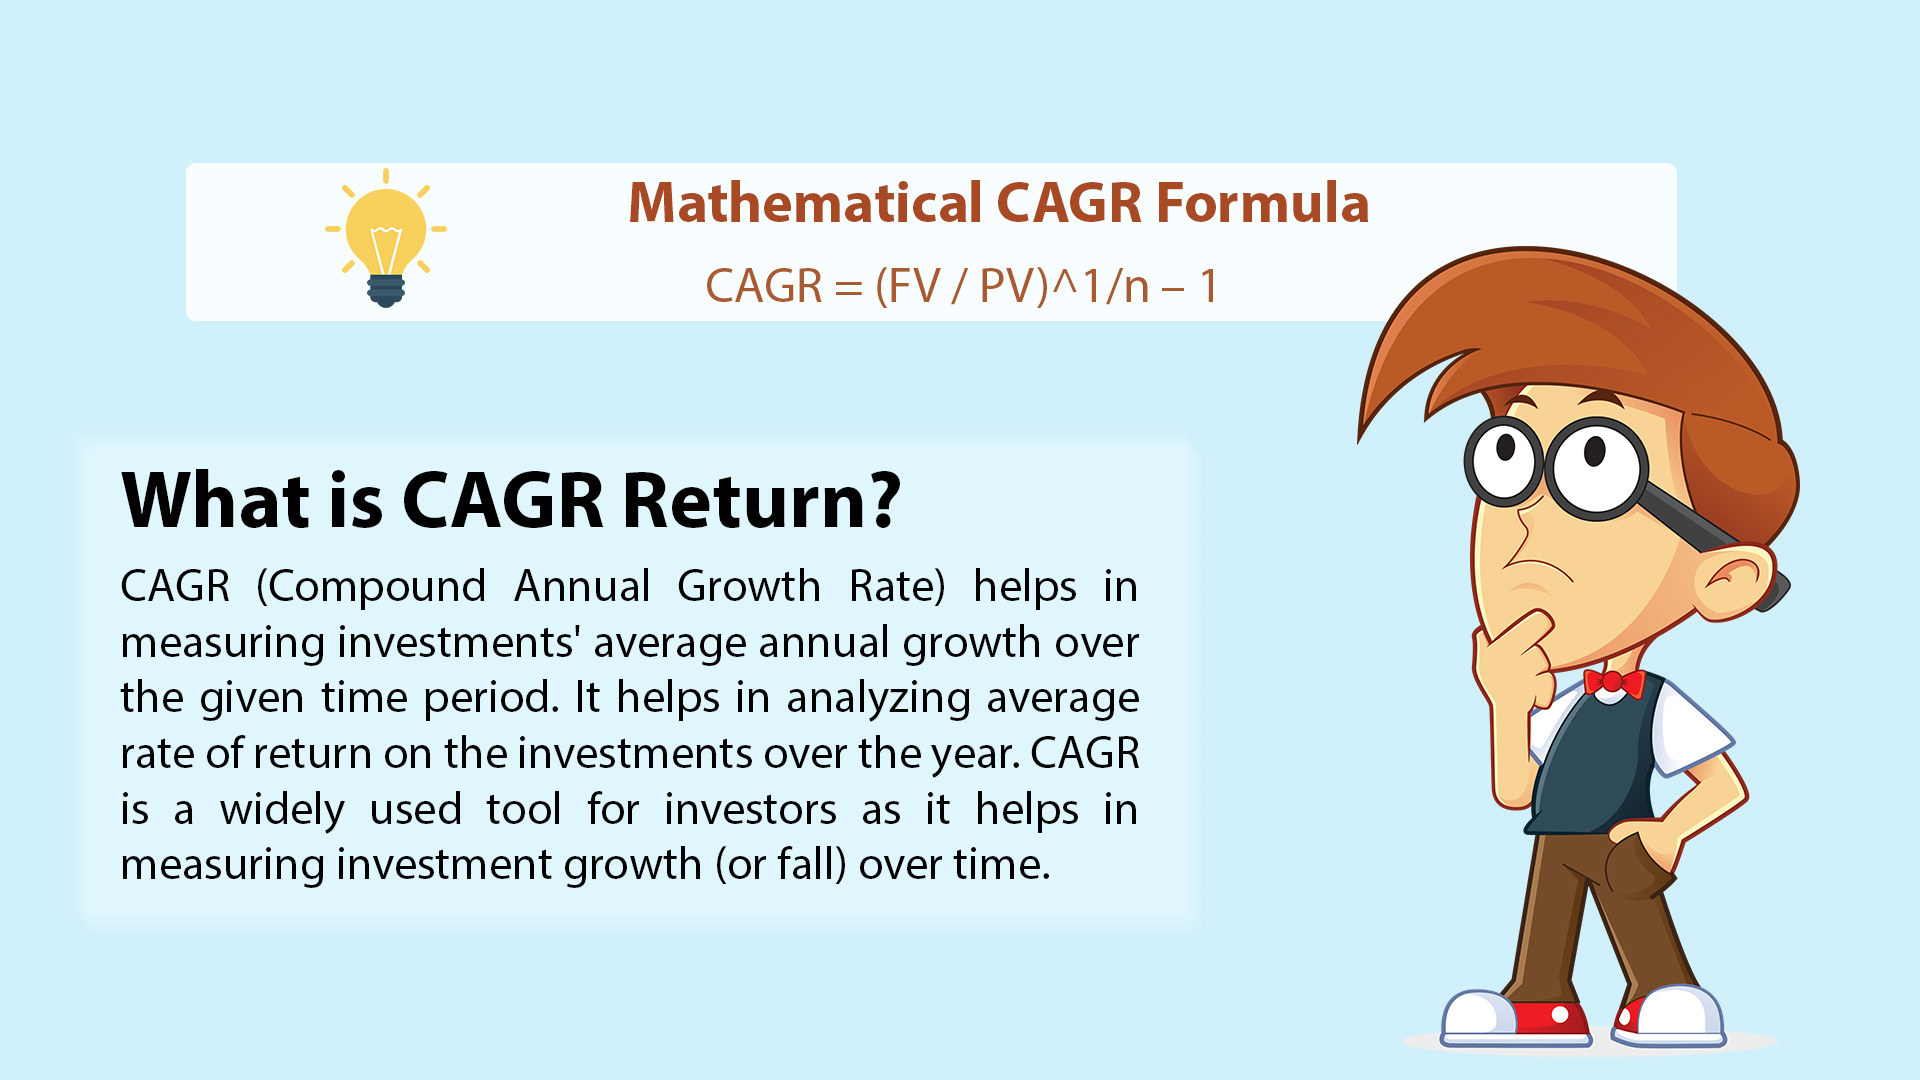 What is CAGR Return?